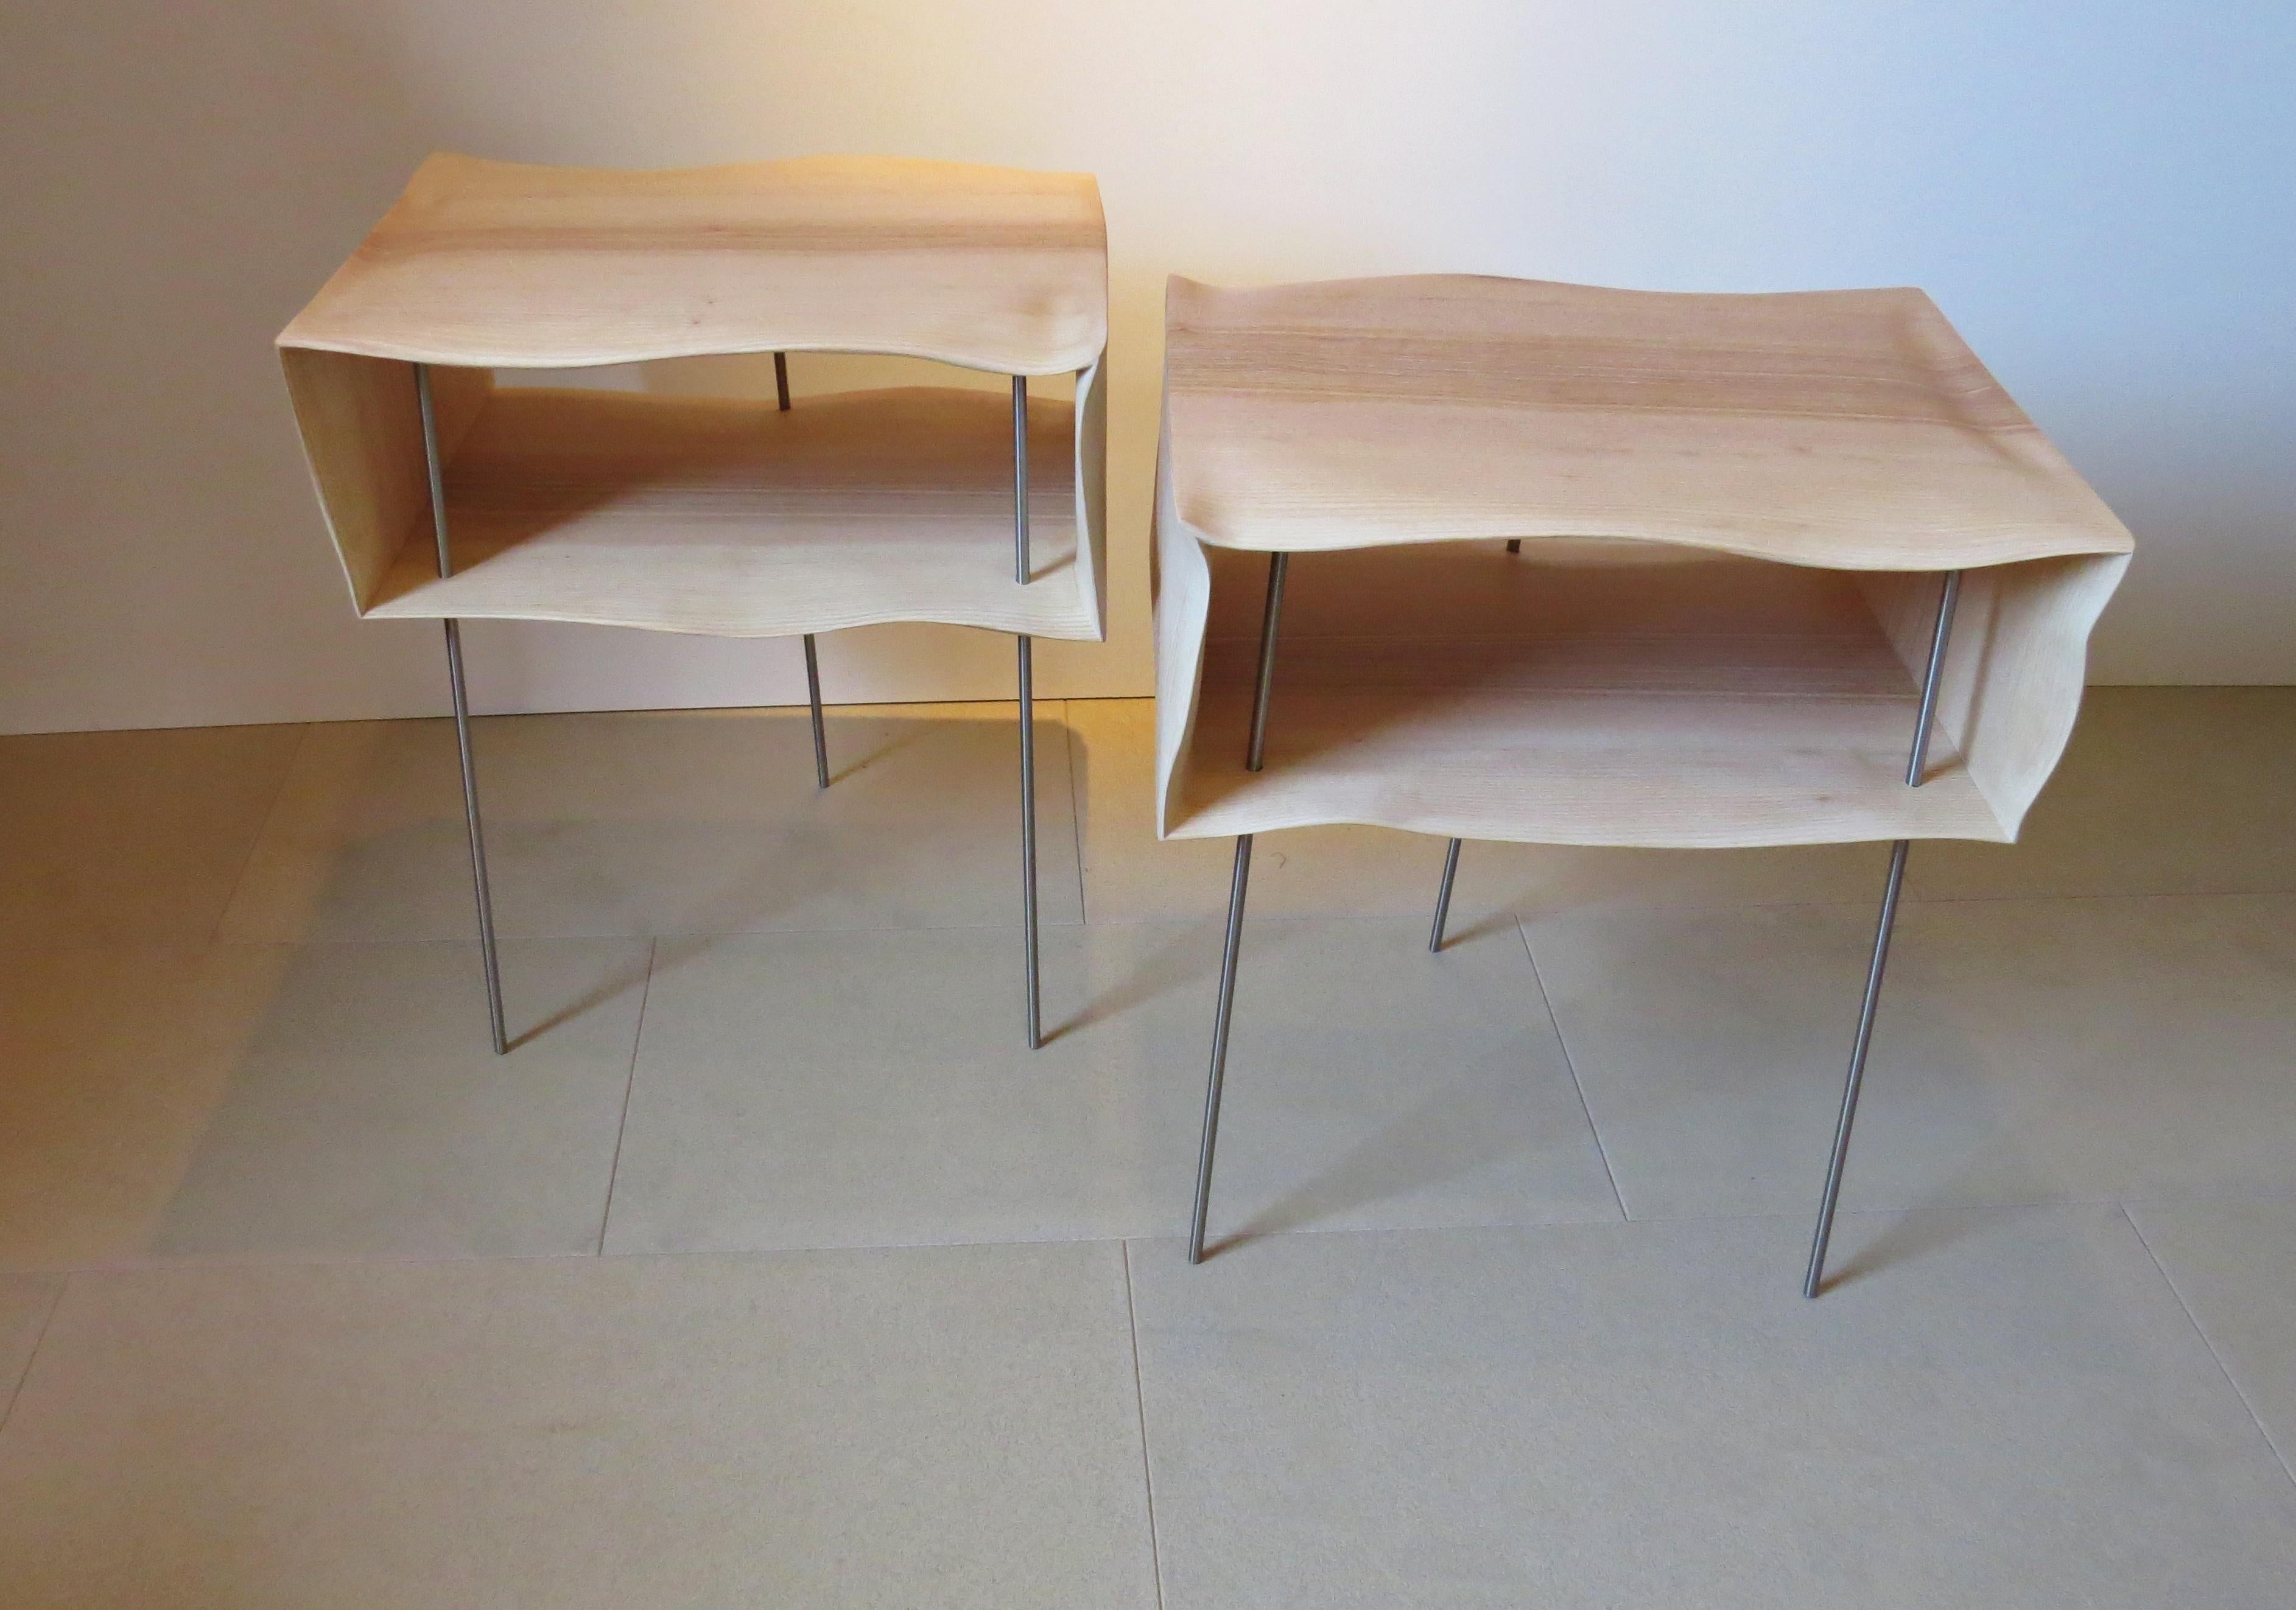 German Bedside Tables, Organic Design, Handmade, Two-Pieces Set, Solid Wood For Sale